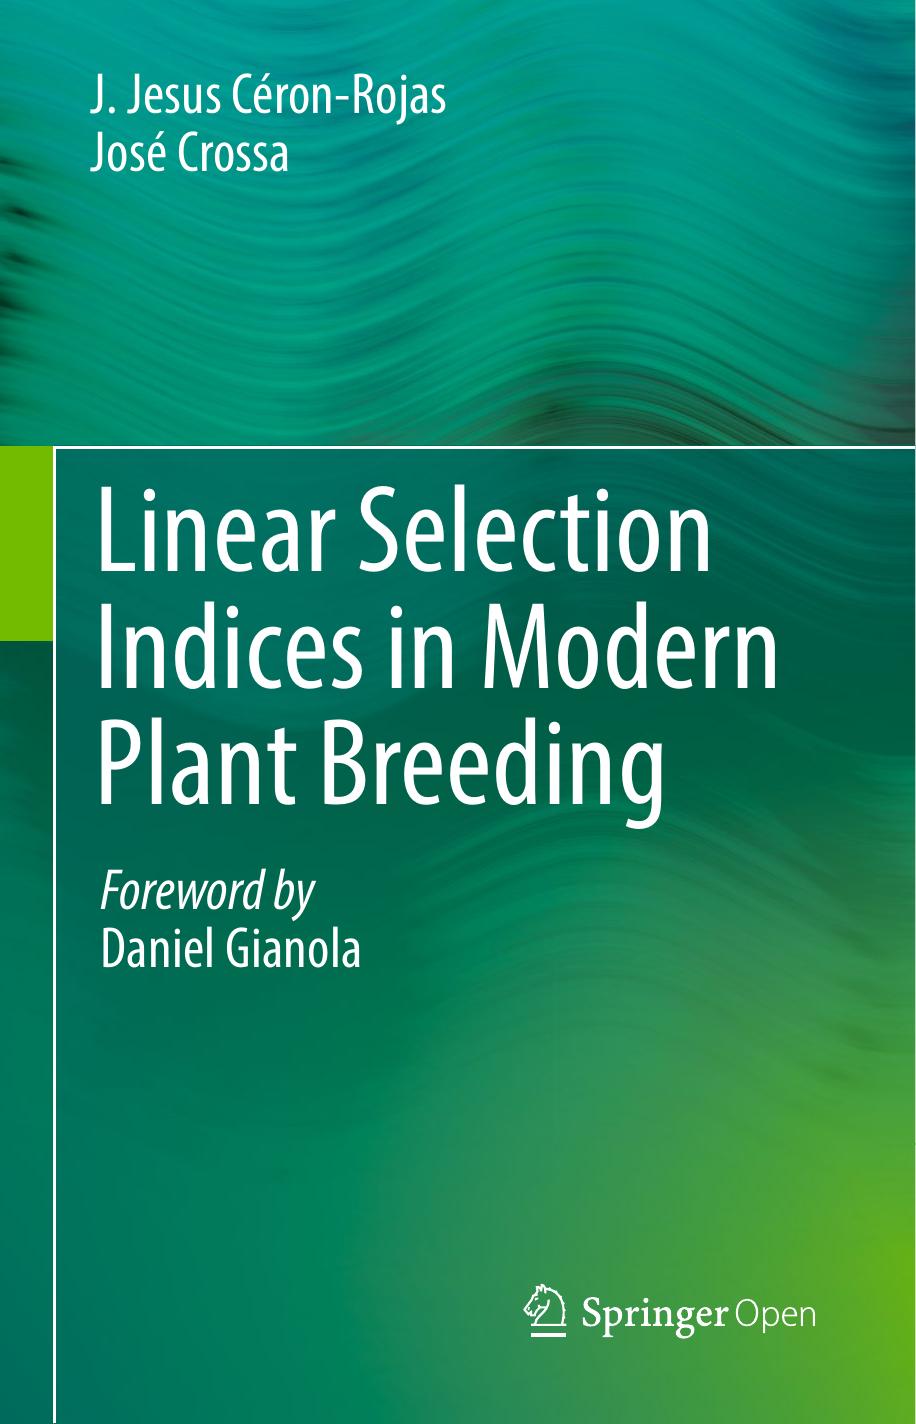 Linear Selection Indices in Modern Plant Breeding 2018